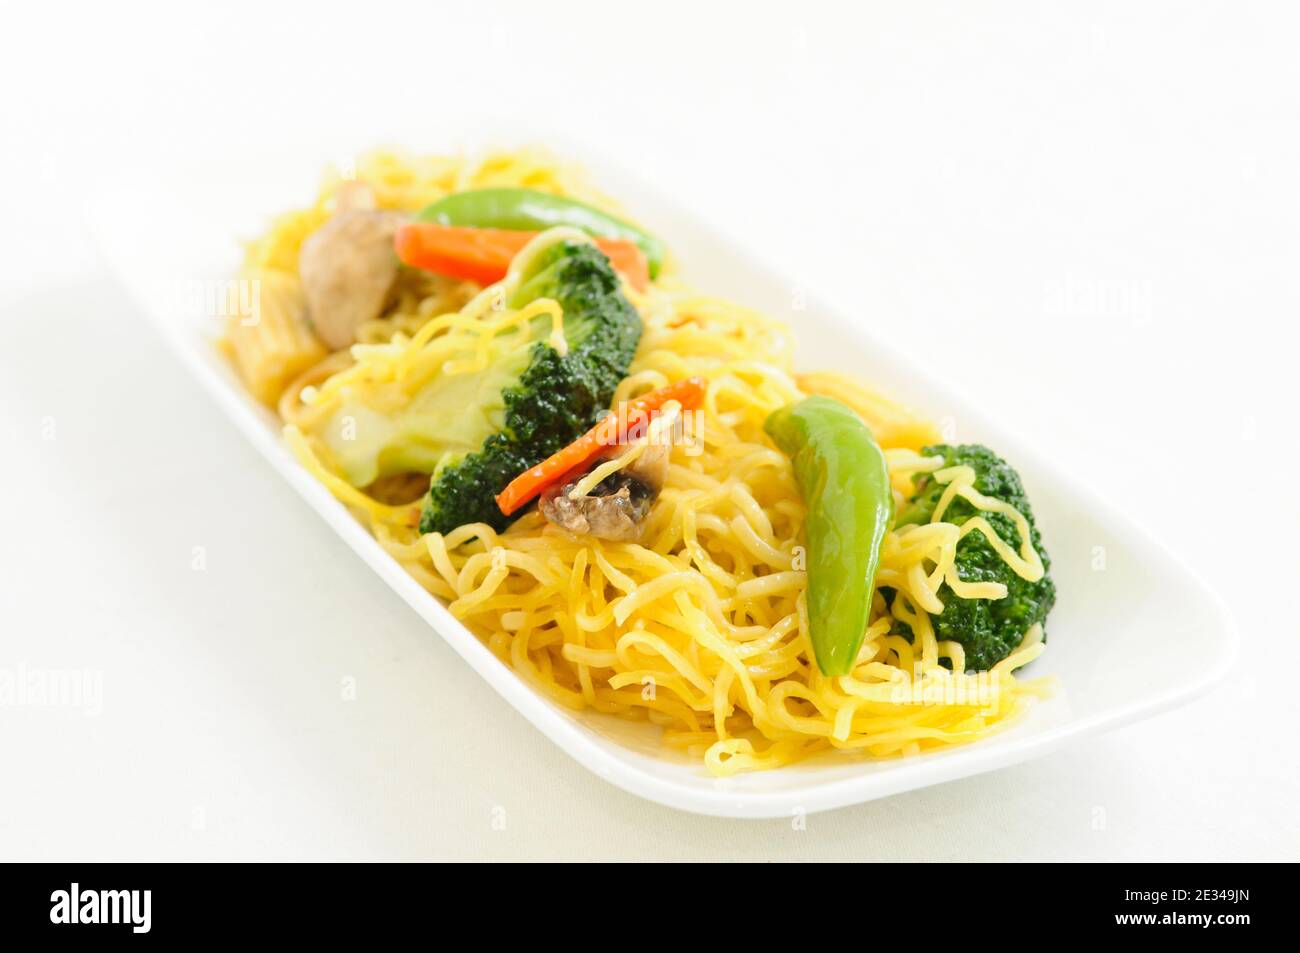 Isolated shot of a tasty dish with pasta and vegetables Stock Photo